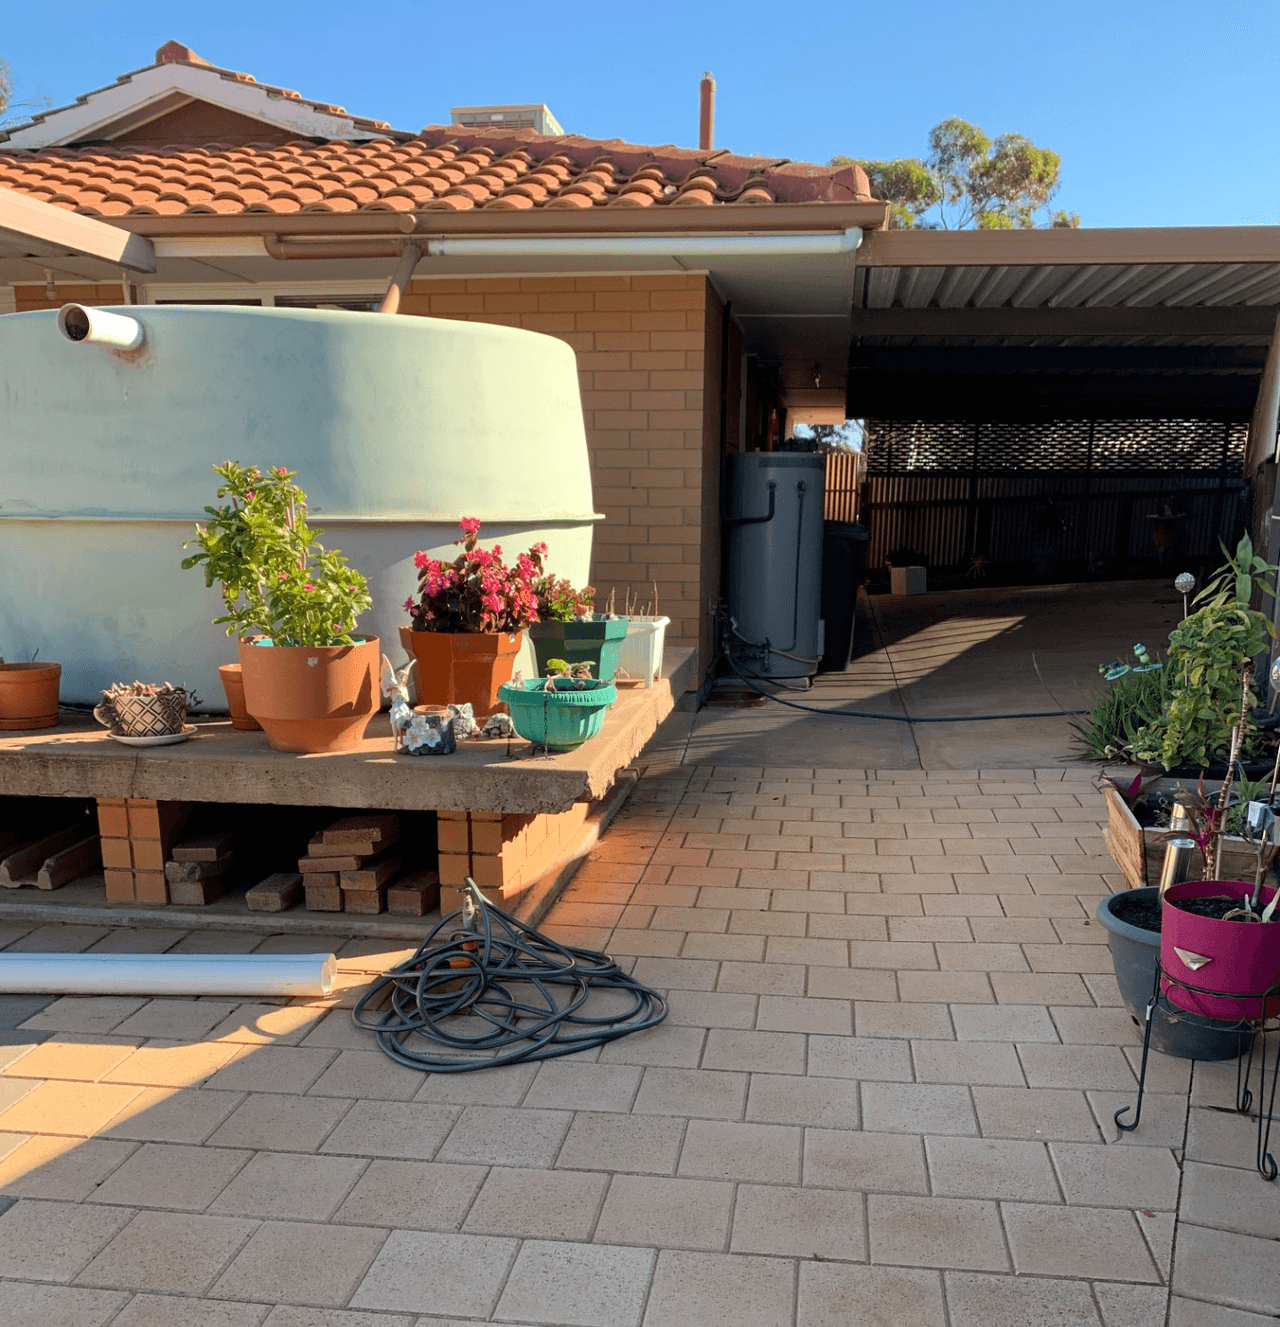 7 Anderson Crescent, PORT AUGUSTA WEST, SA 5700